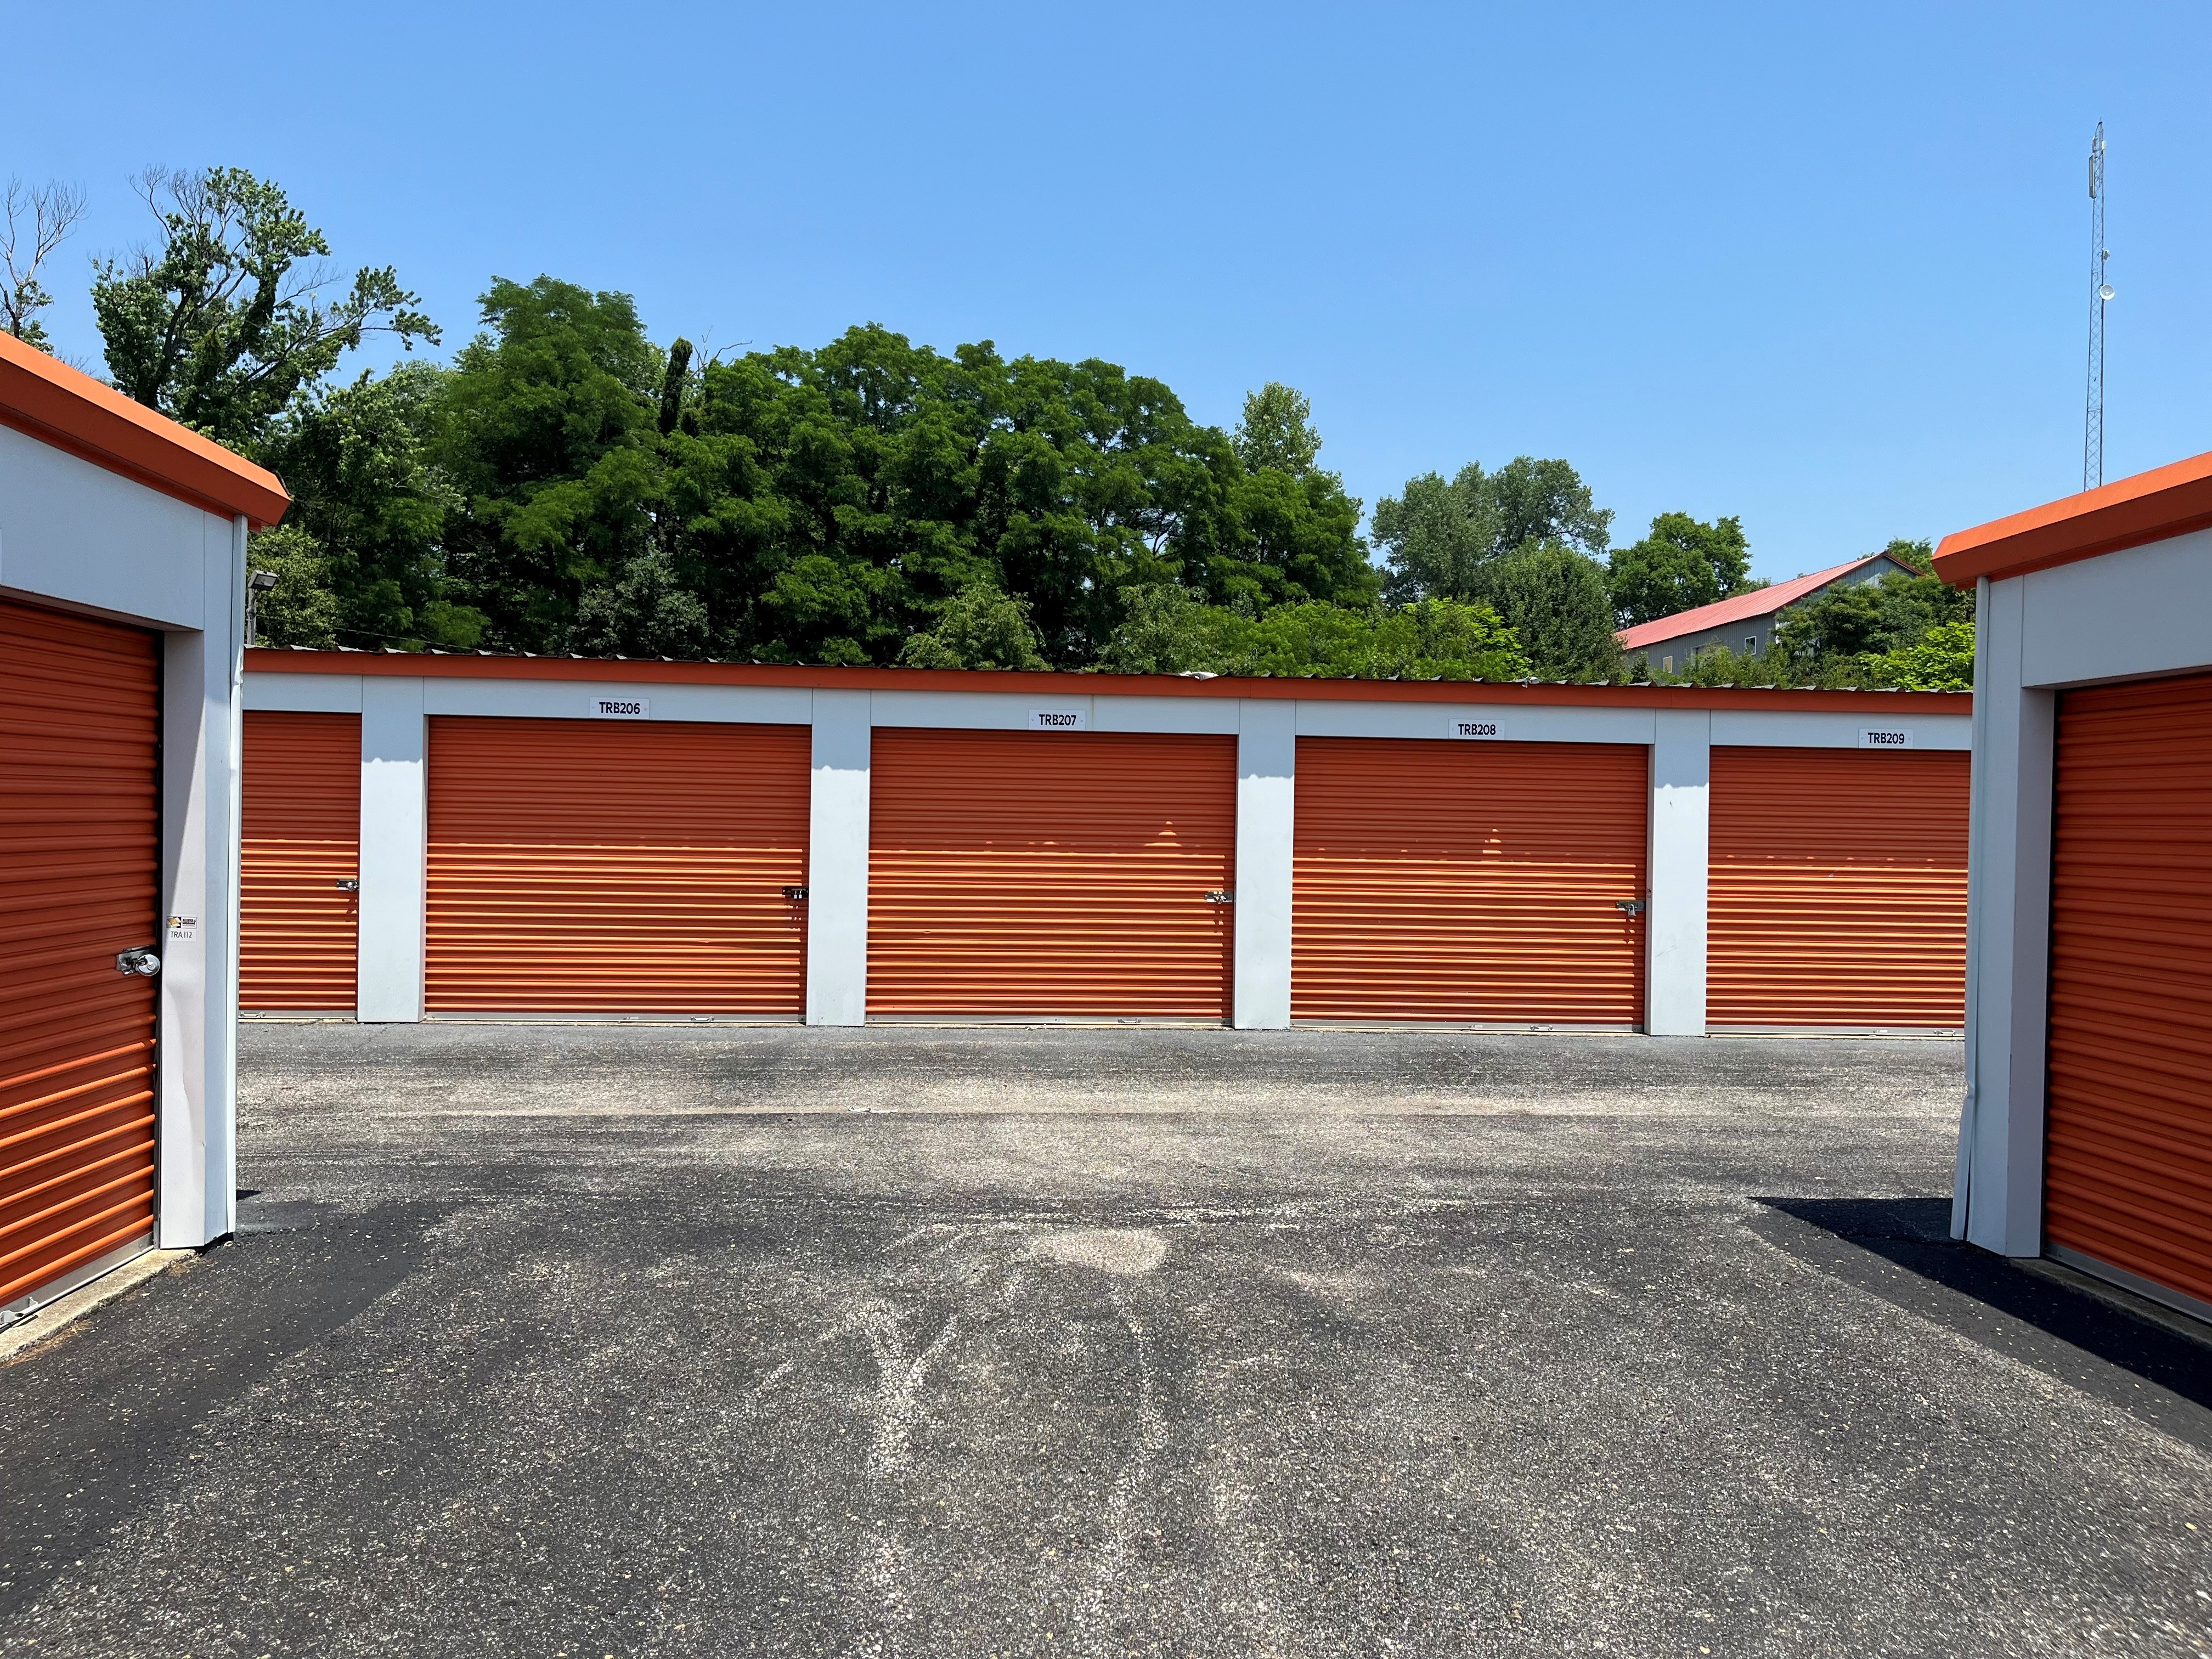 Well-maintained storage units with white doors on Truman Rd in Jasper, featuring broad, paved driveways for convenient drive-up access.